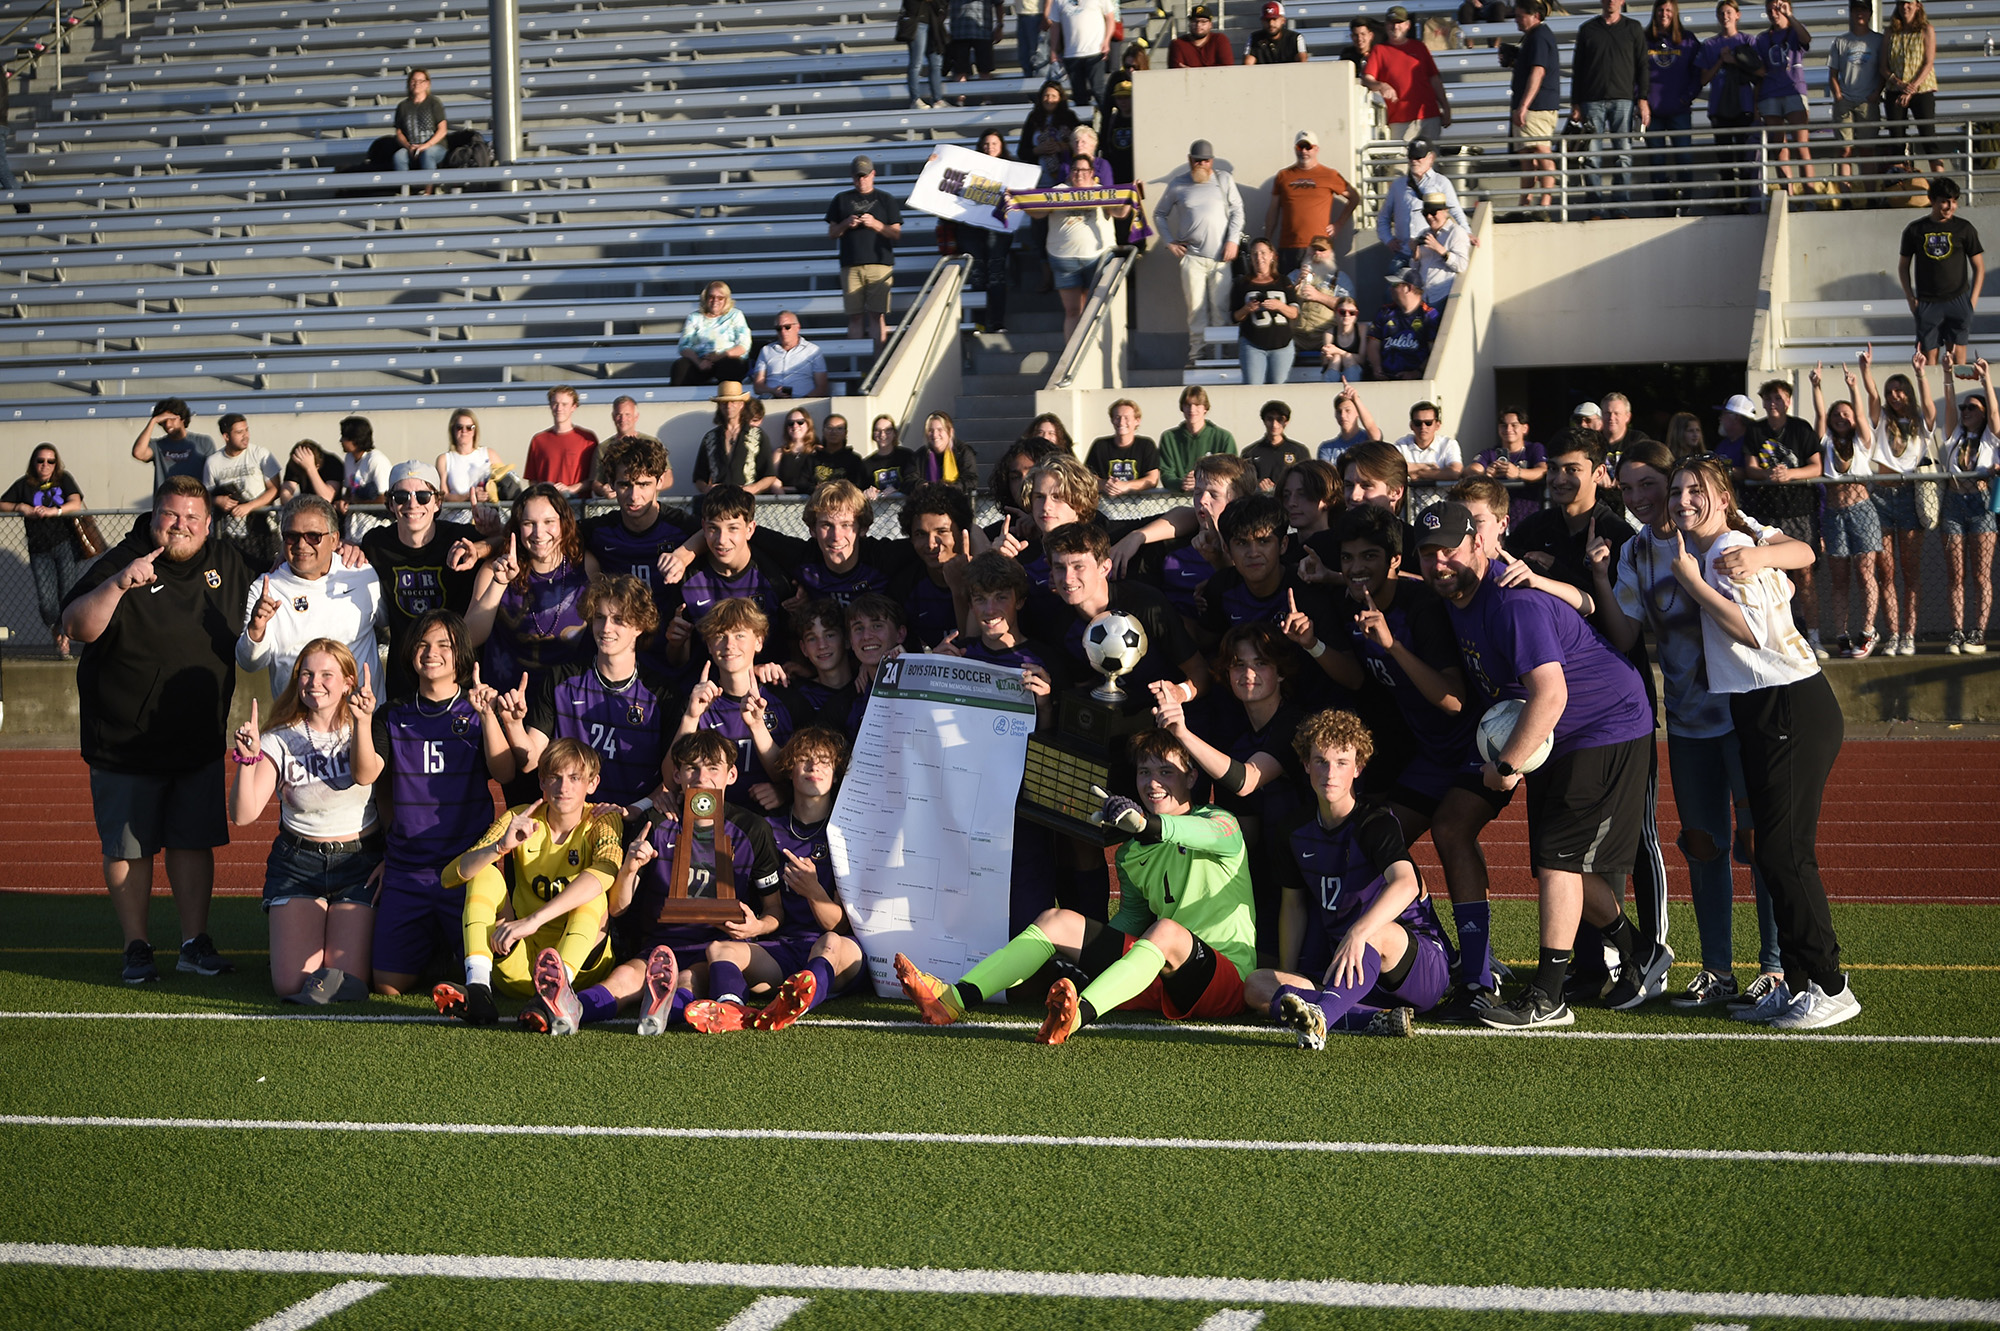 Members of the Columbia River boys soccer team pose for a team photo  after beating North Kitsap 4-2 in the Class 2A state championship match at Renton Memorial Staadium on Saturday, May 27, 2023.